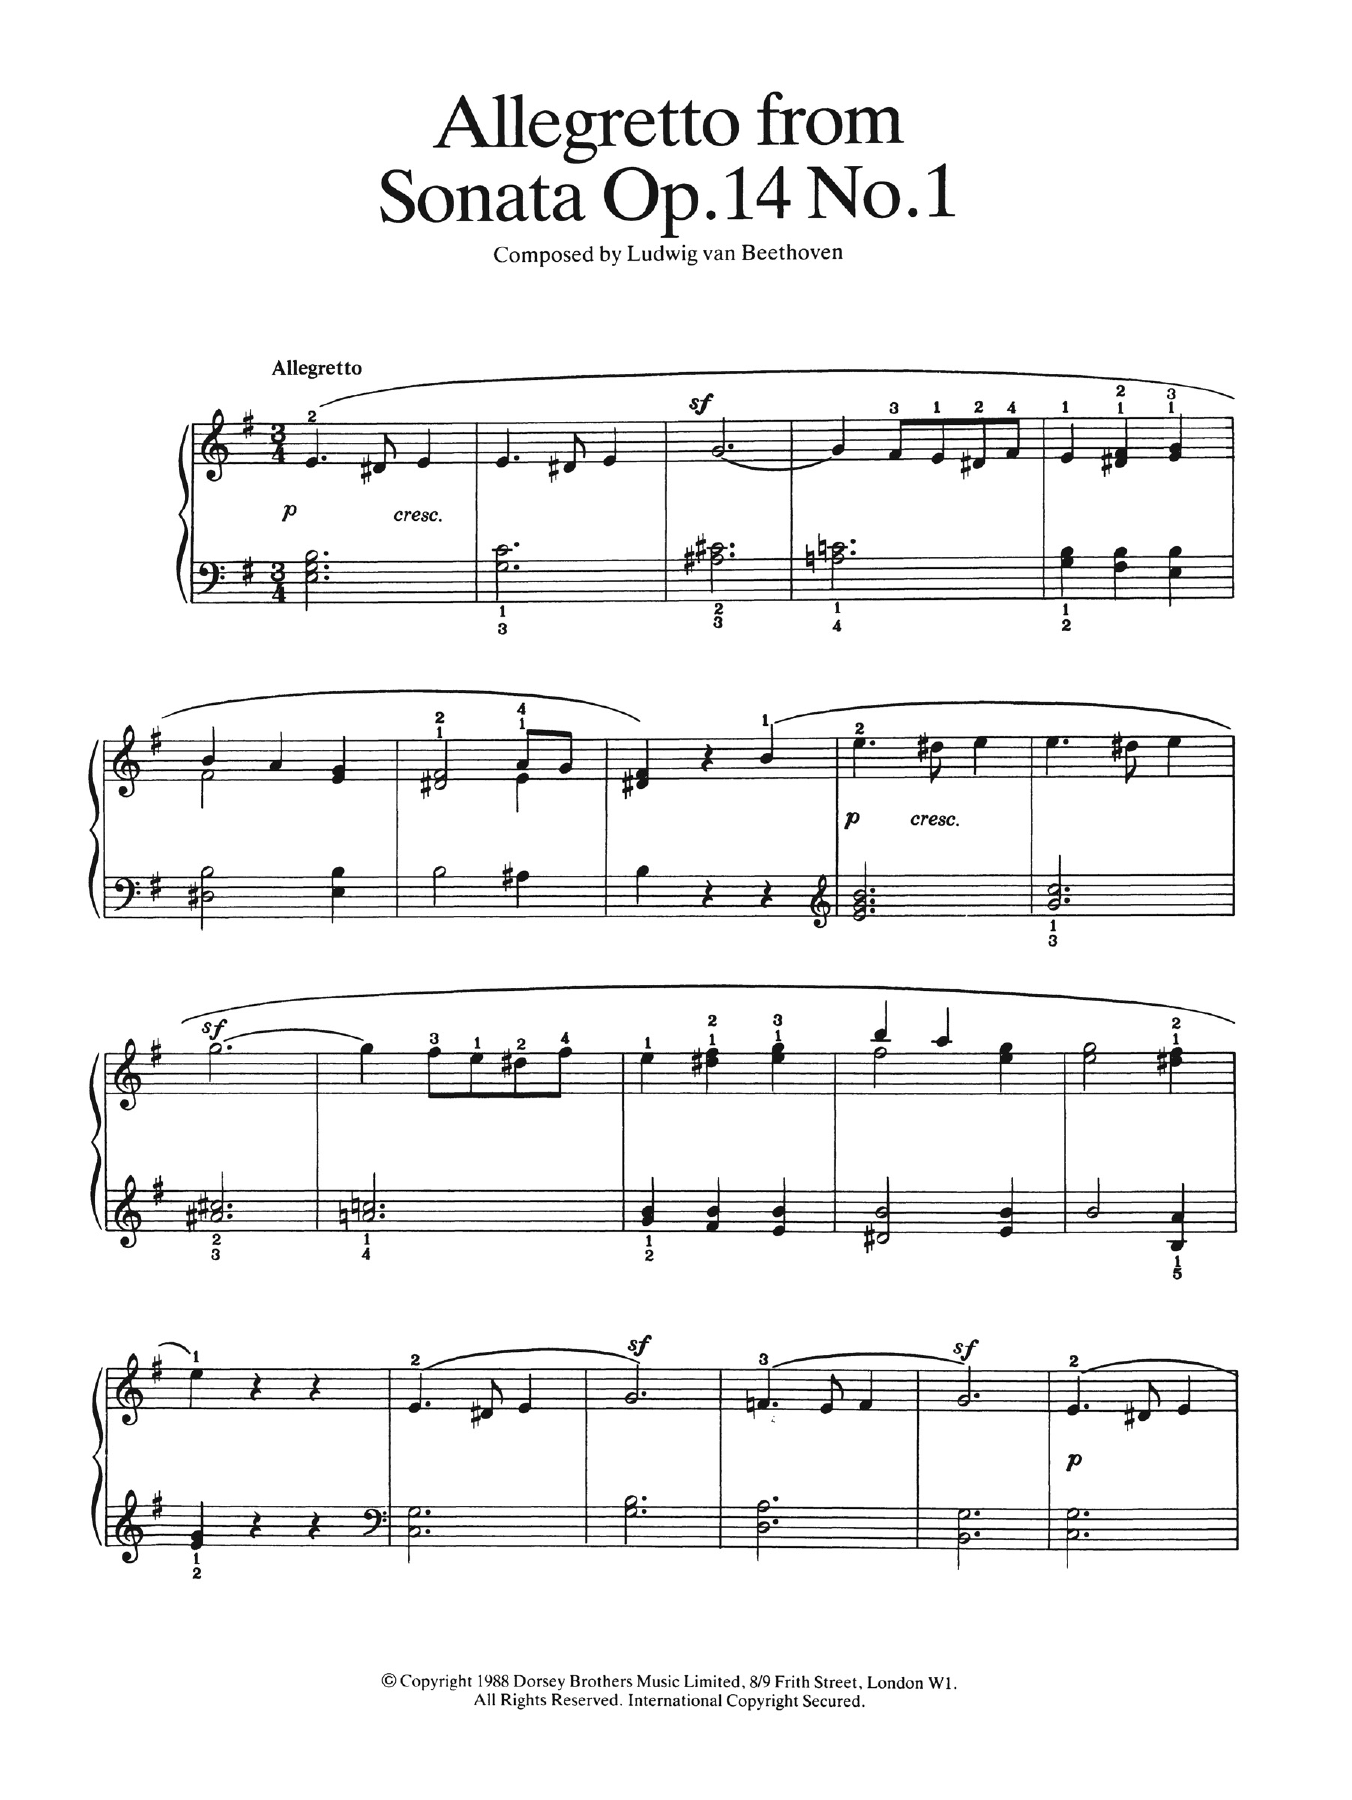 Download Ludwig van Beethoven Allegretto from Sonata Op. 14, No. 1 Sheet Music